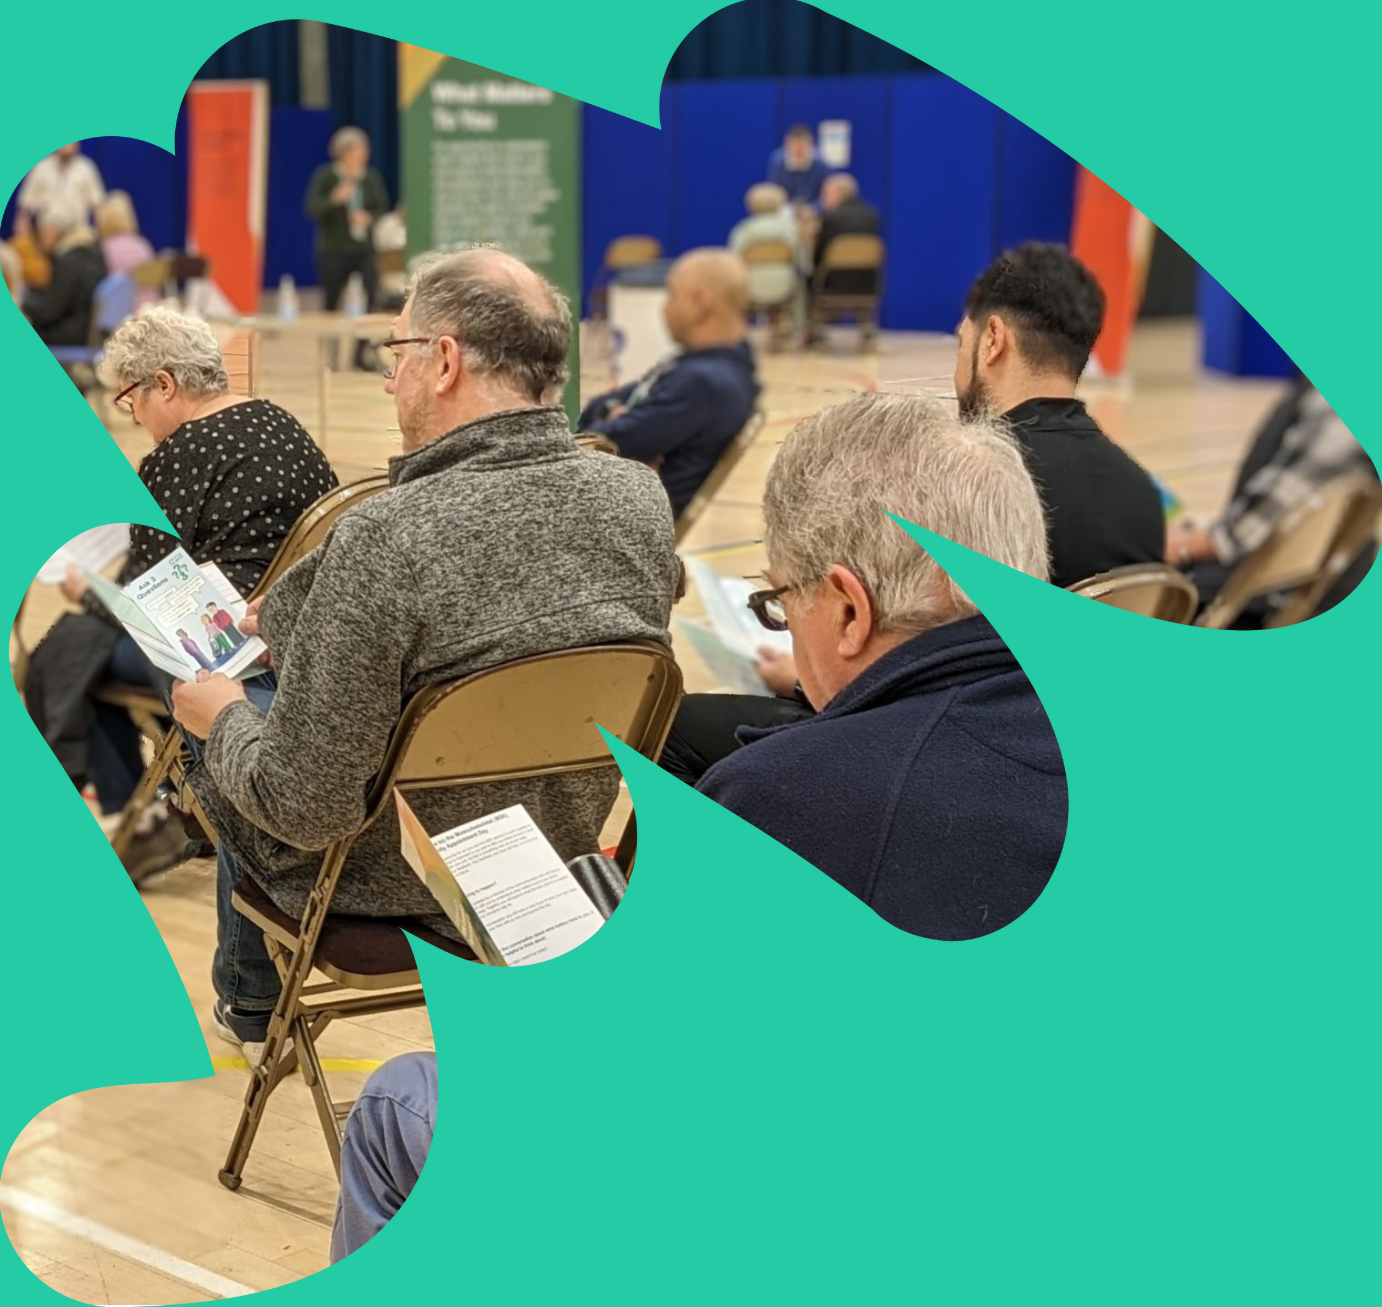 Image features people sitting on chairs in a sports hall reading information about the community appointment day they are attending.